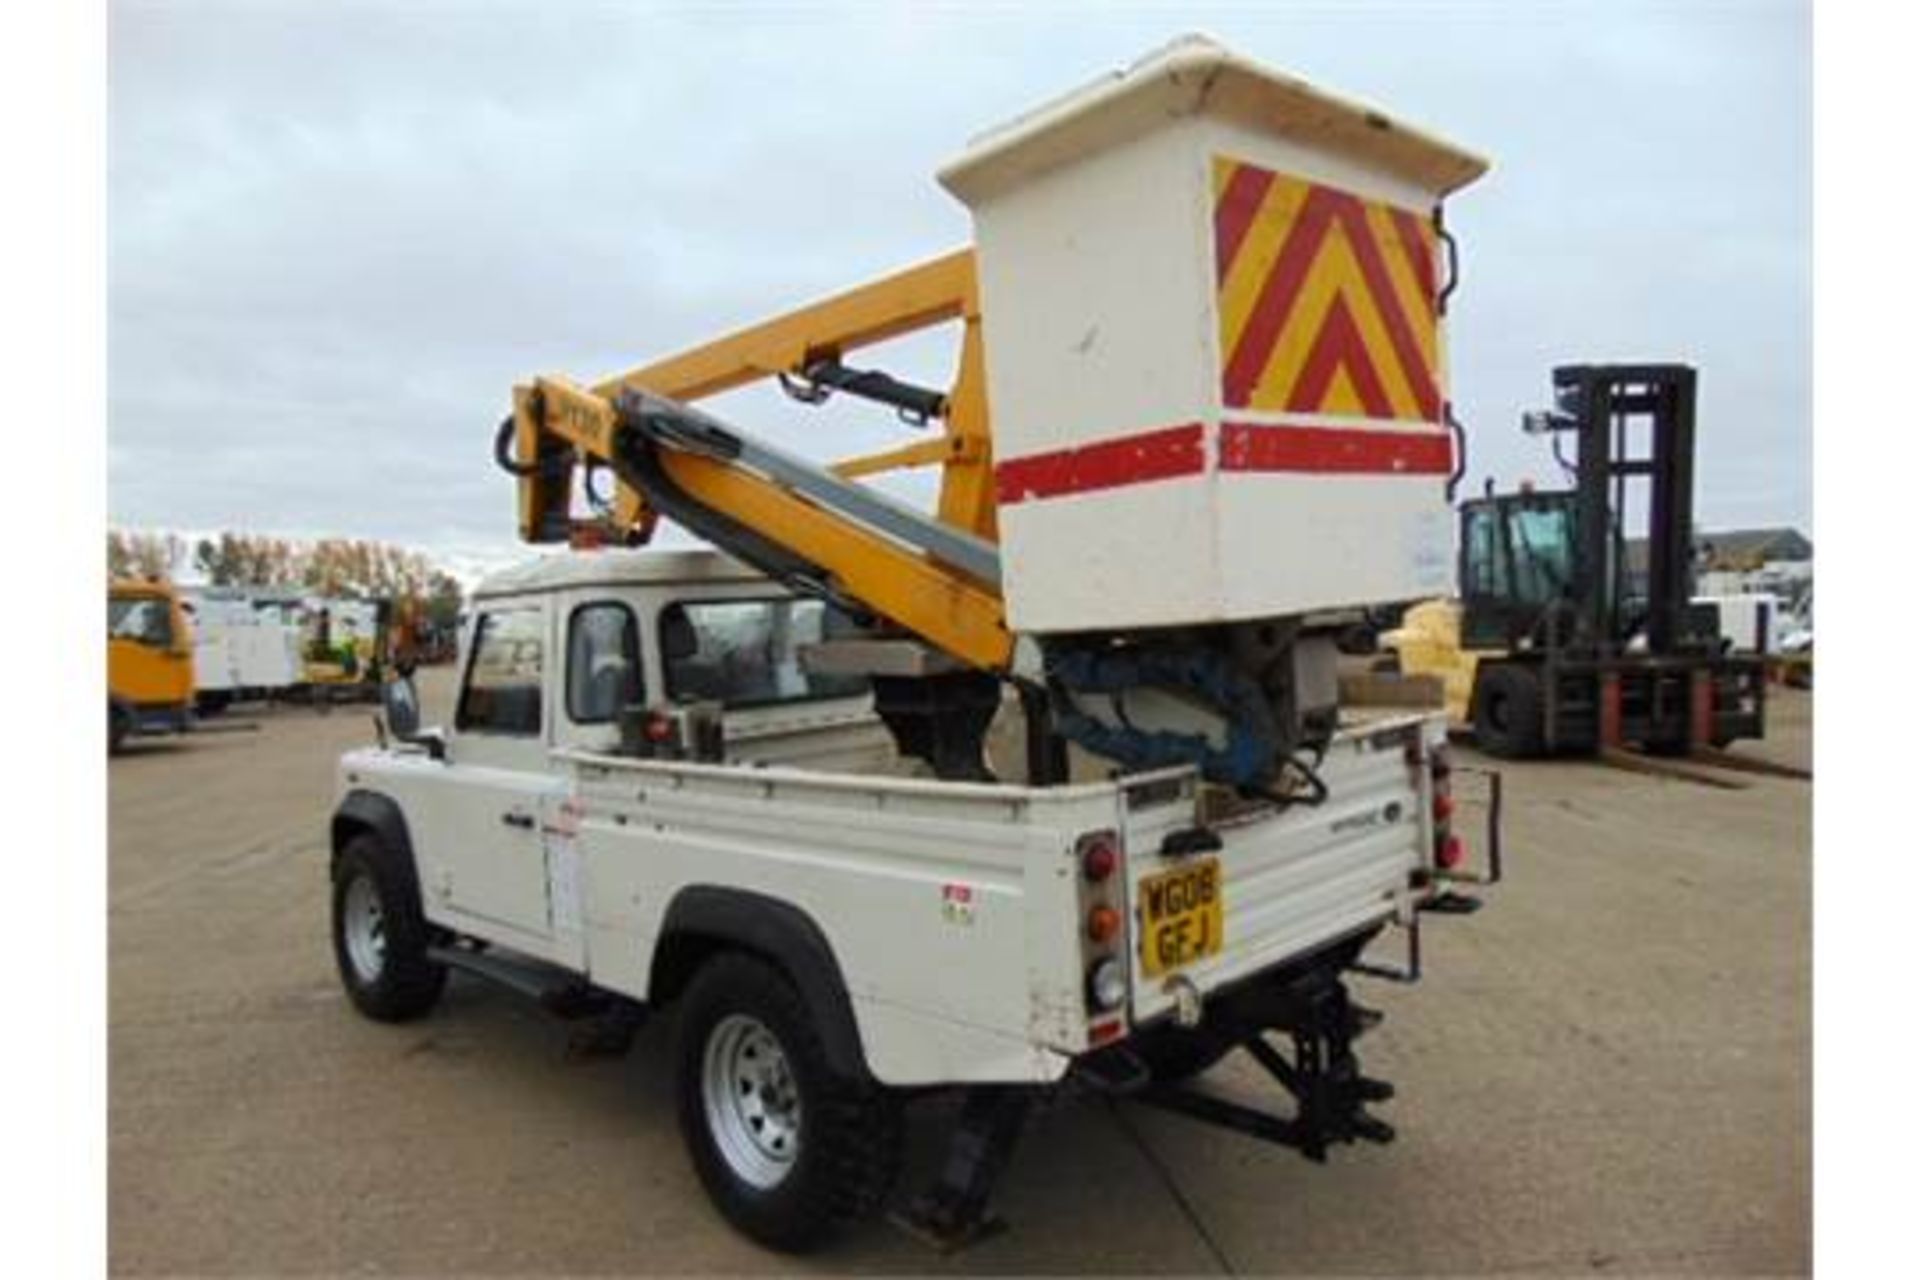 Land Rover Defender 110 High Capacity Cherry Picker - Image 11 of 34